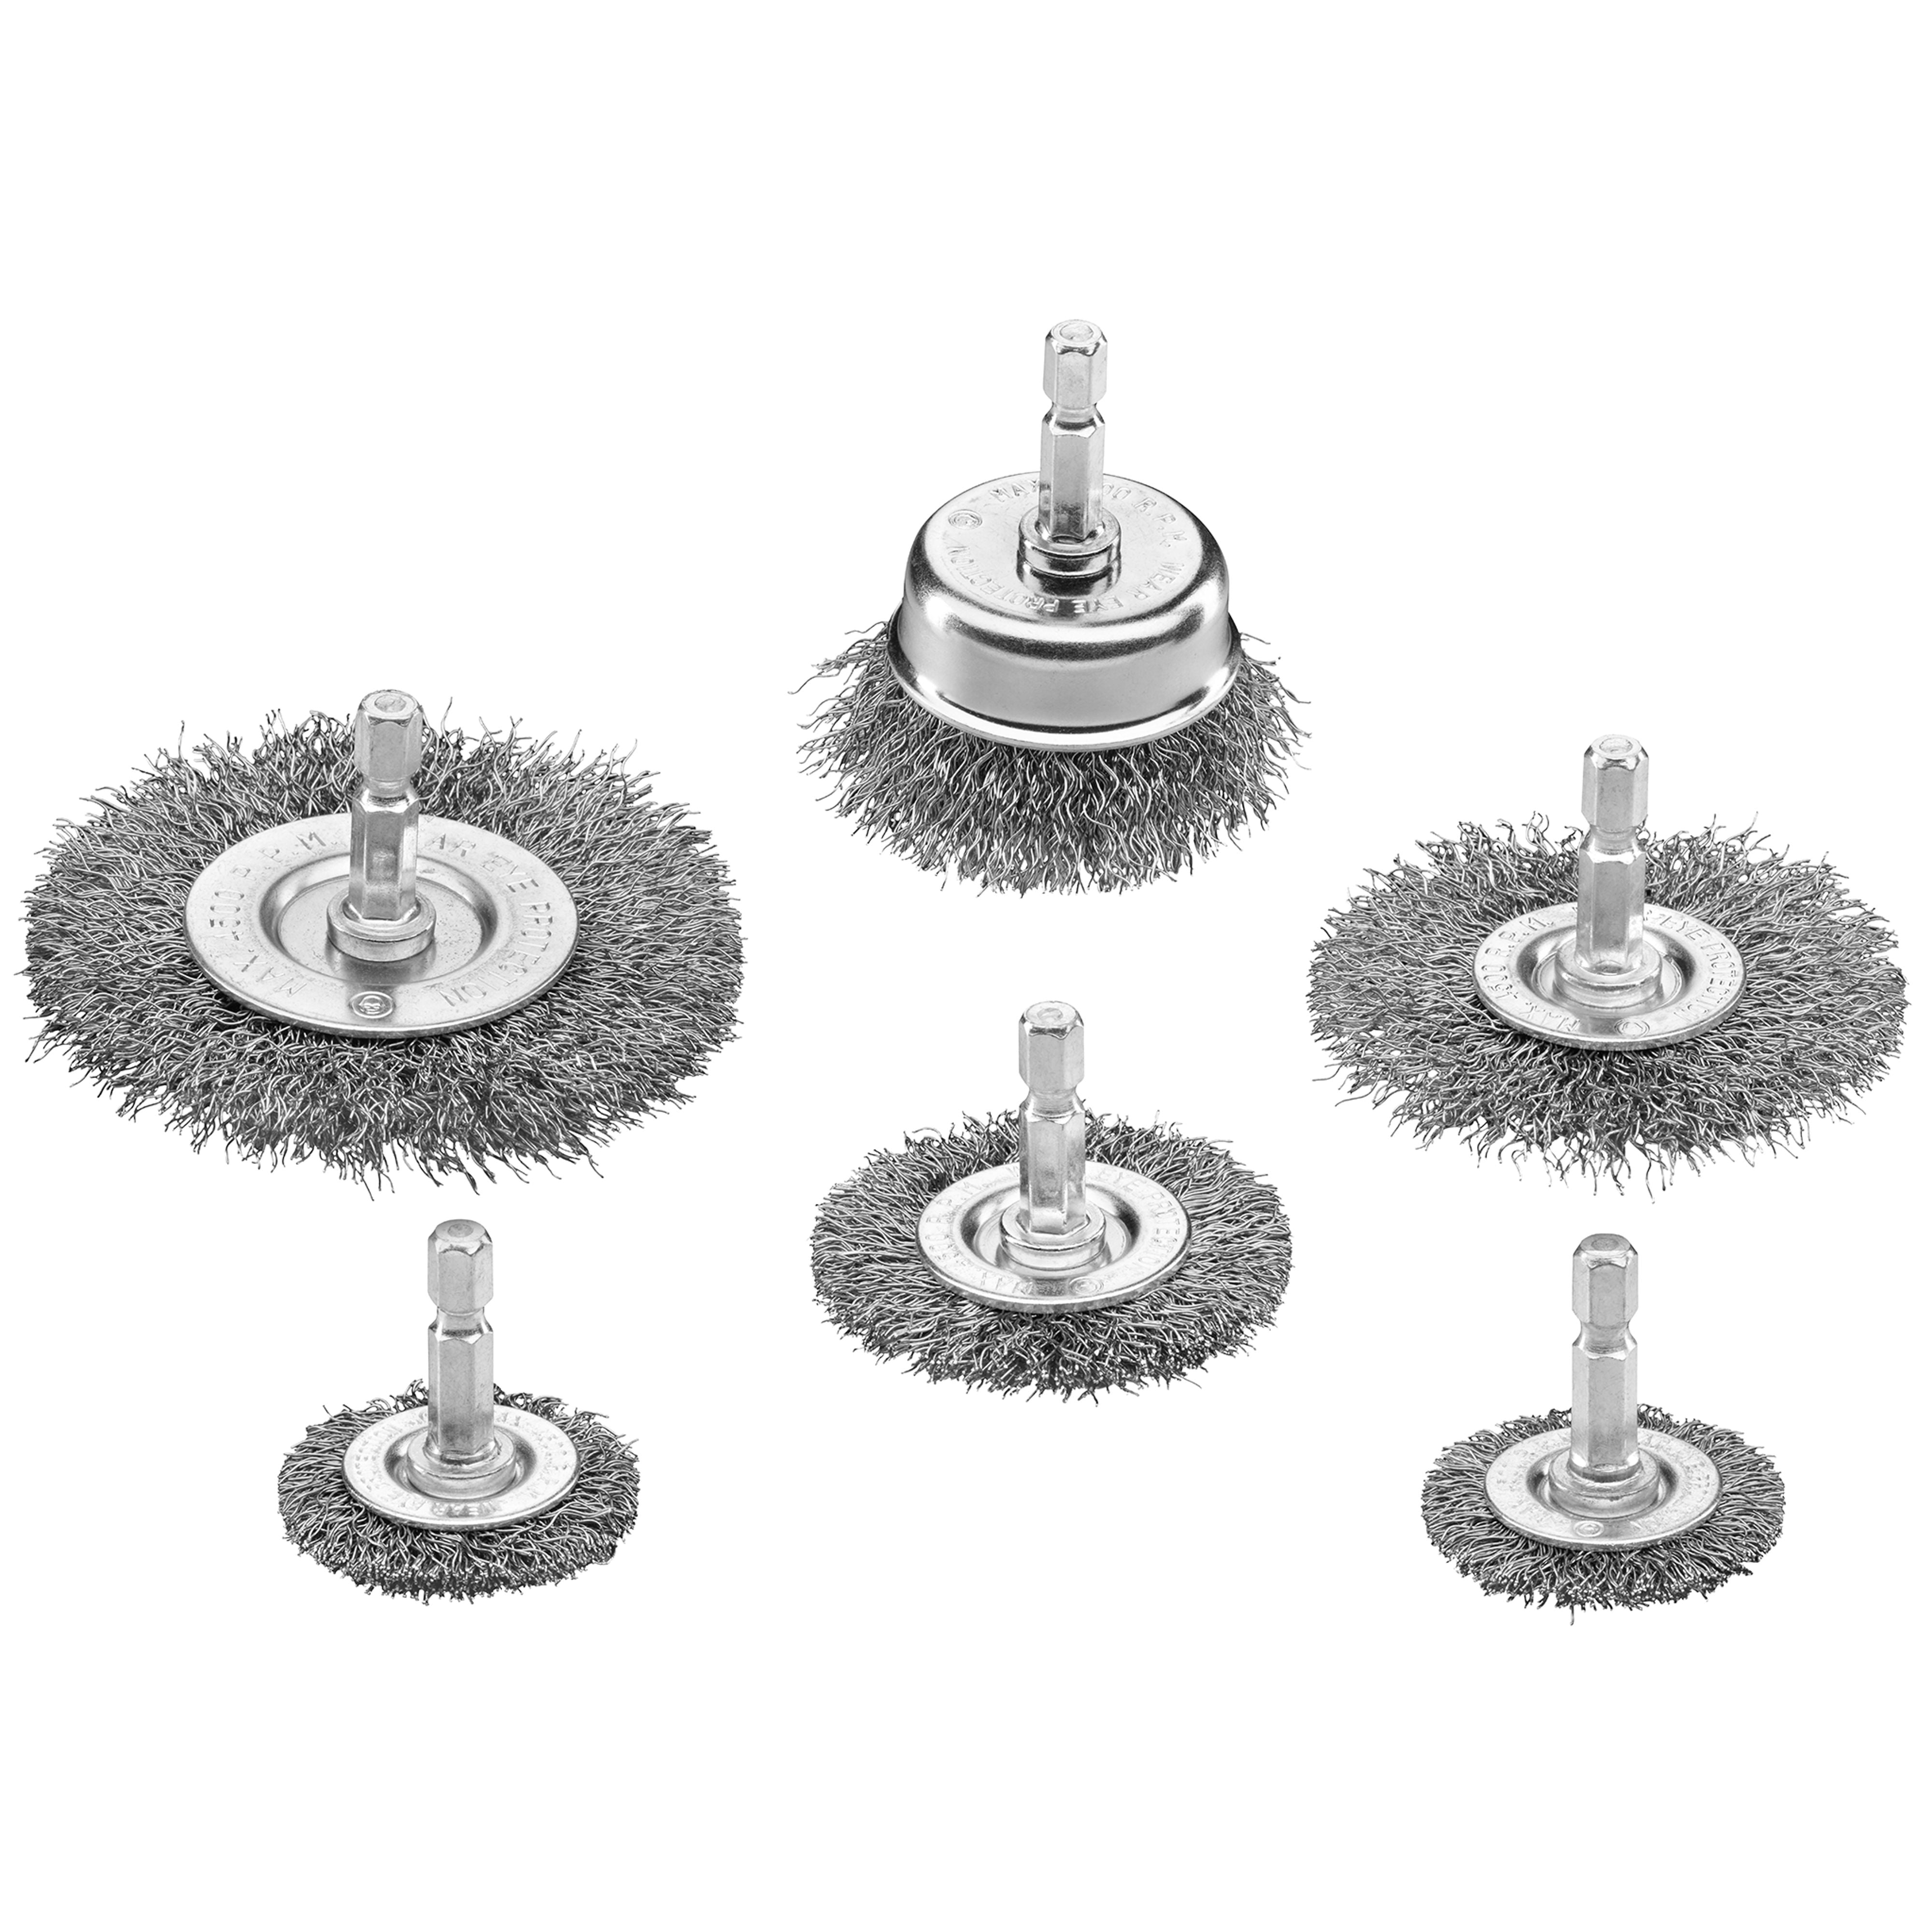 1/4 Hex Drive Battery Terminal Brushes